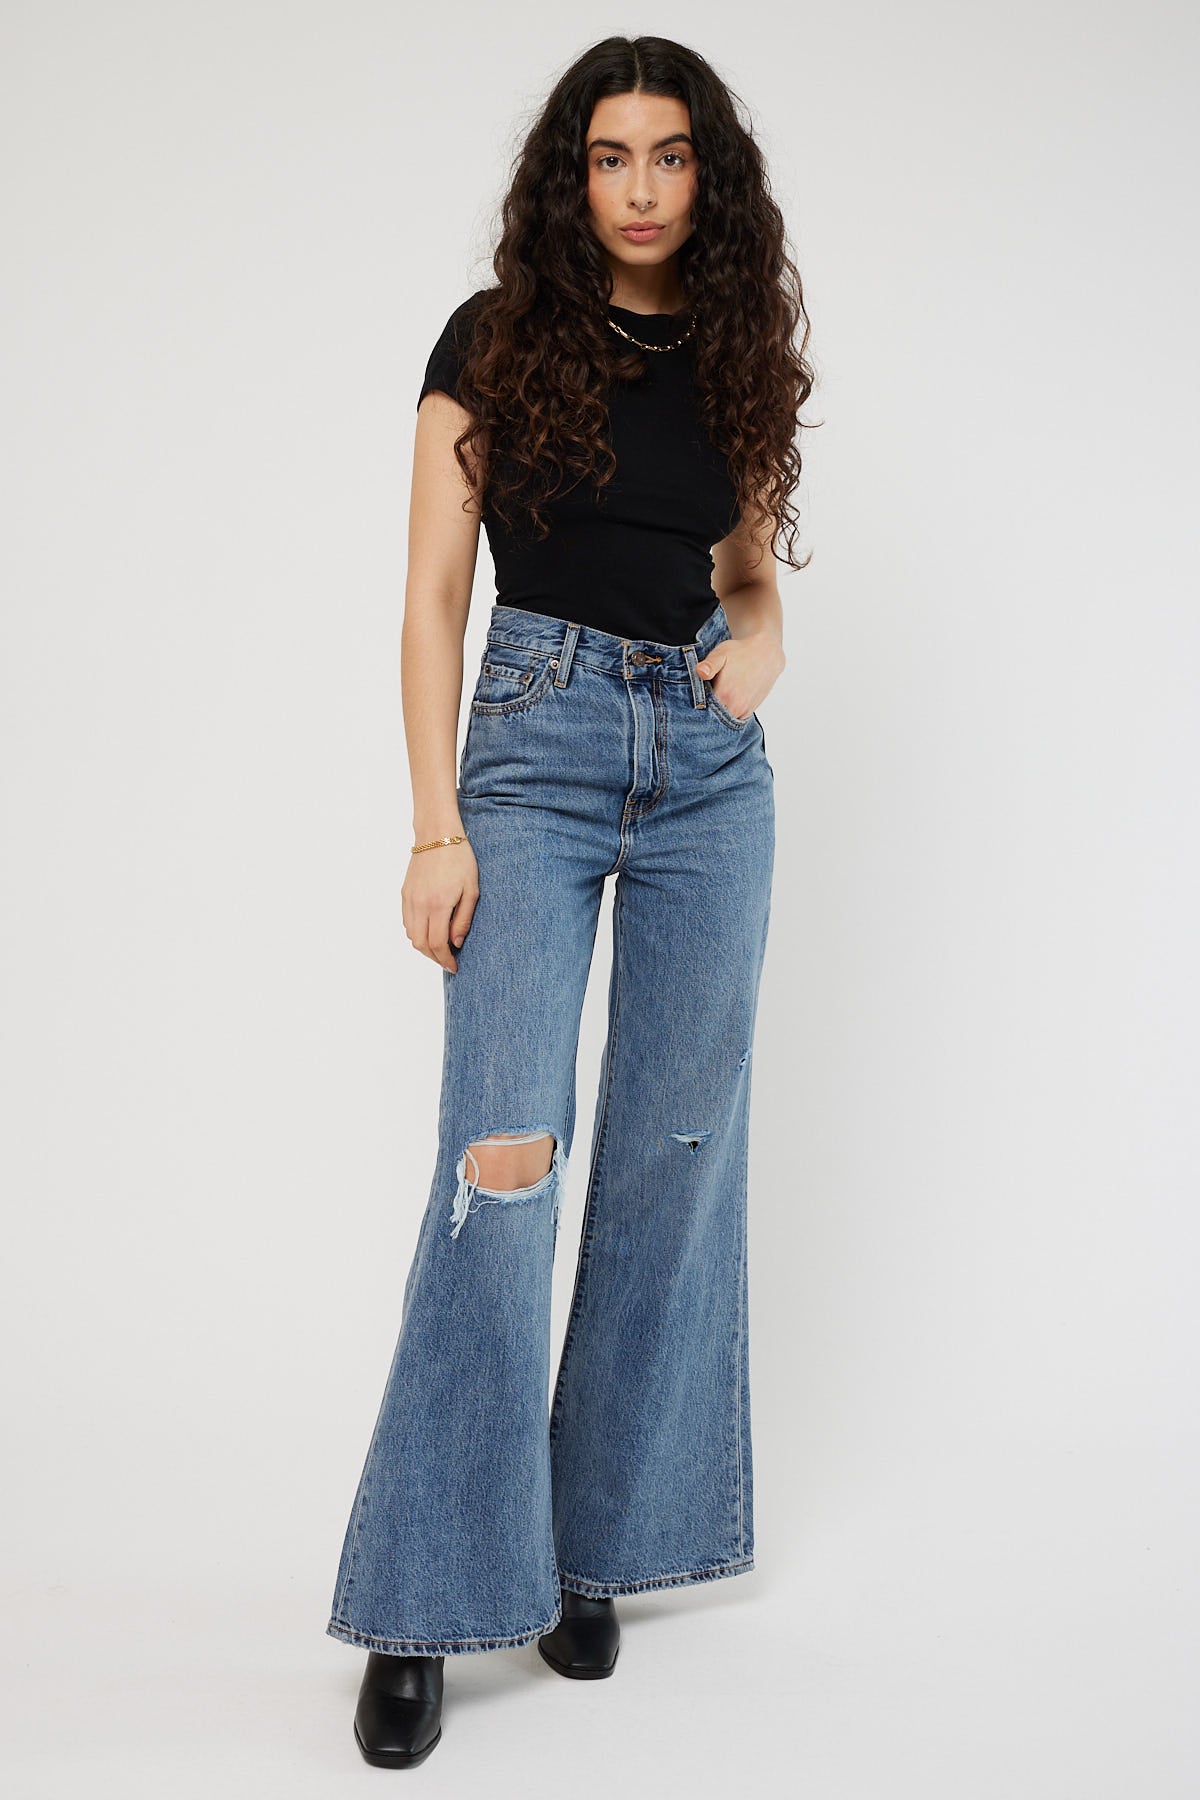 Levi's High Loose Flare Take notes